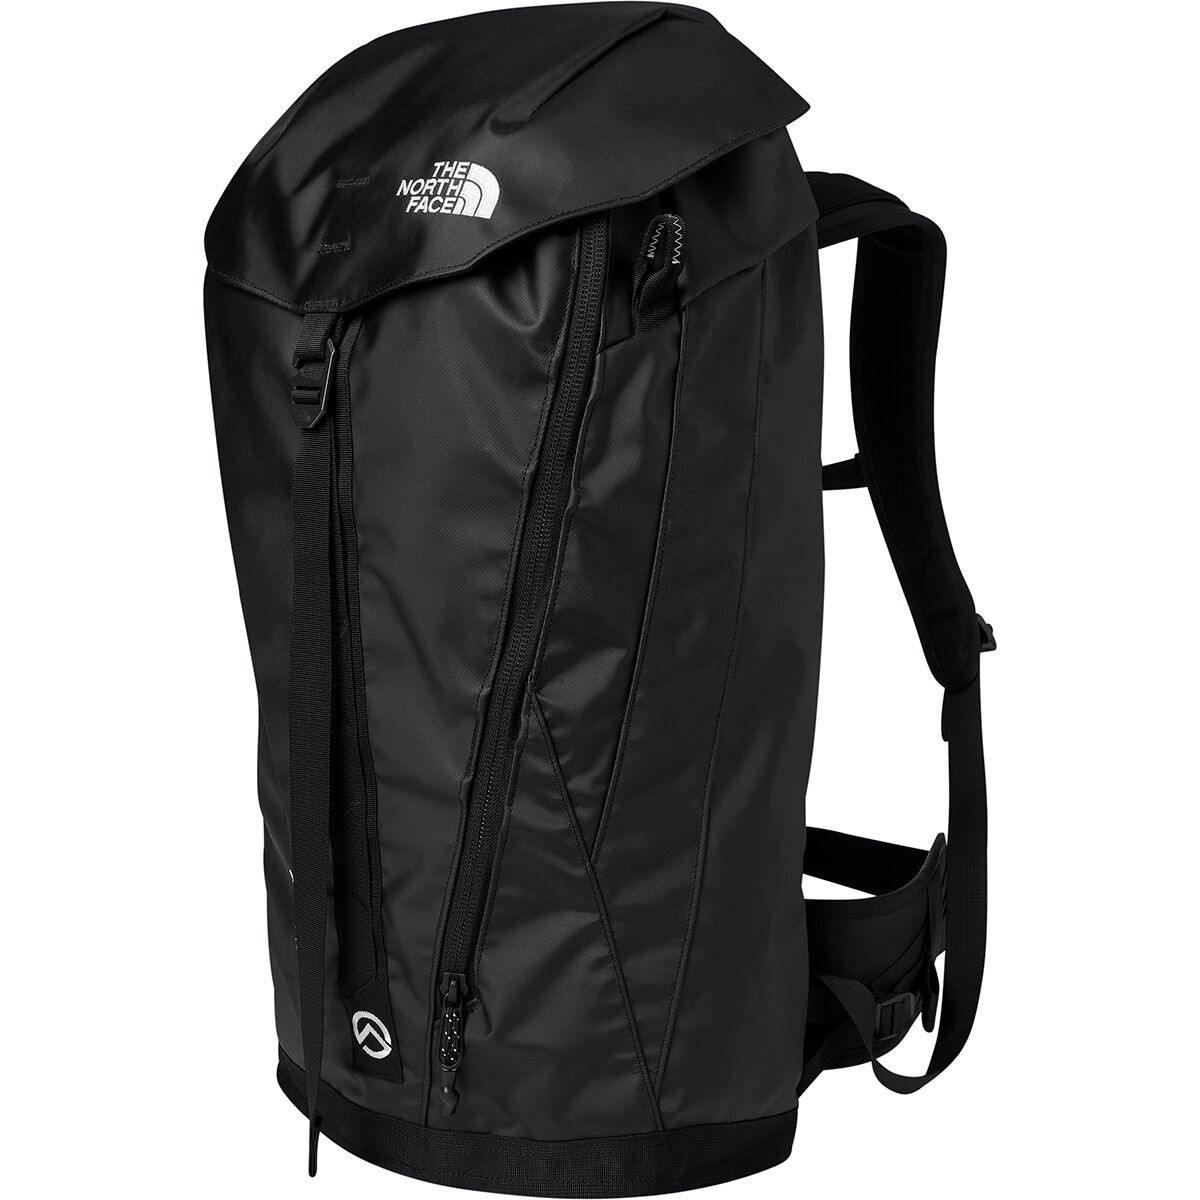 The North Face - Cinder 40 - One Size TNF Black Swirl/TNF Black